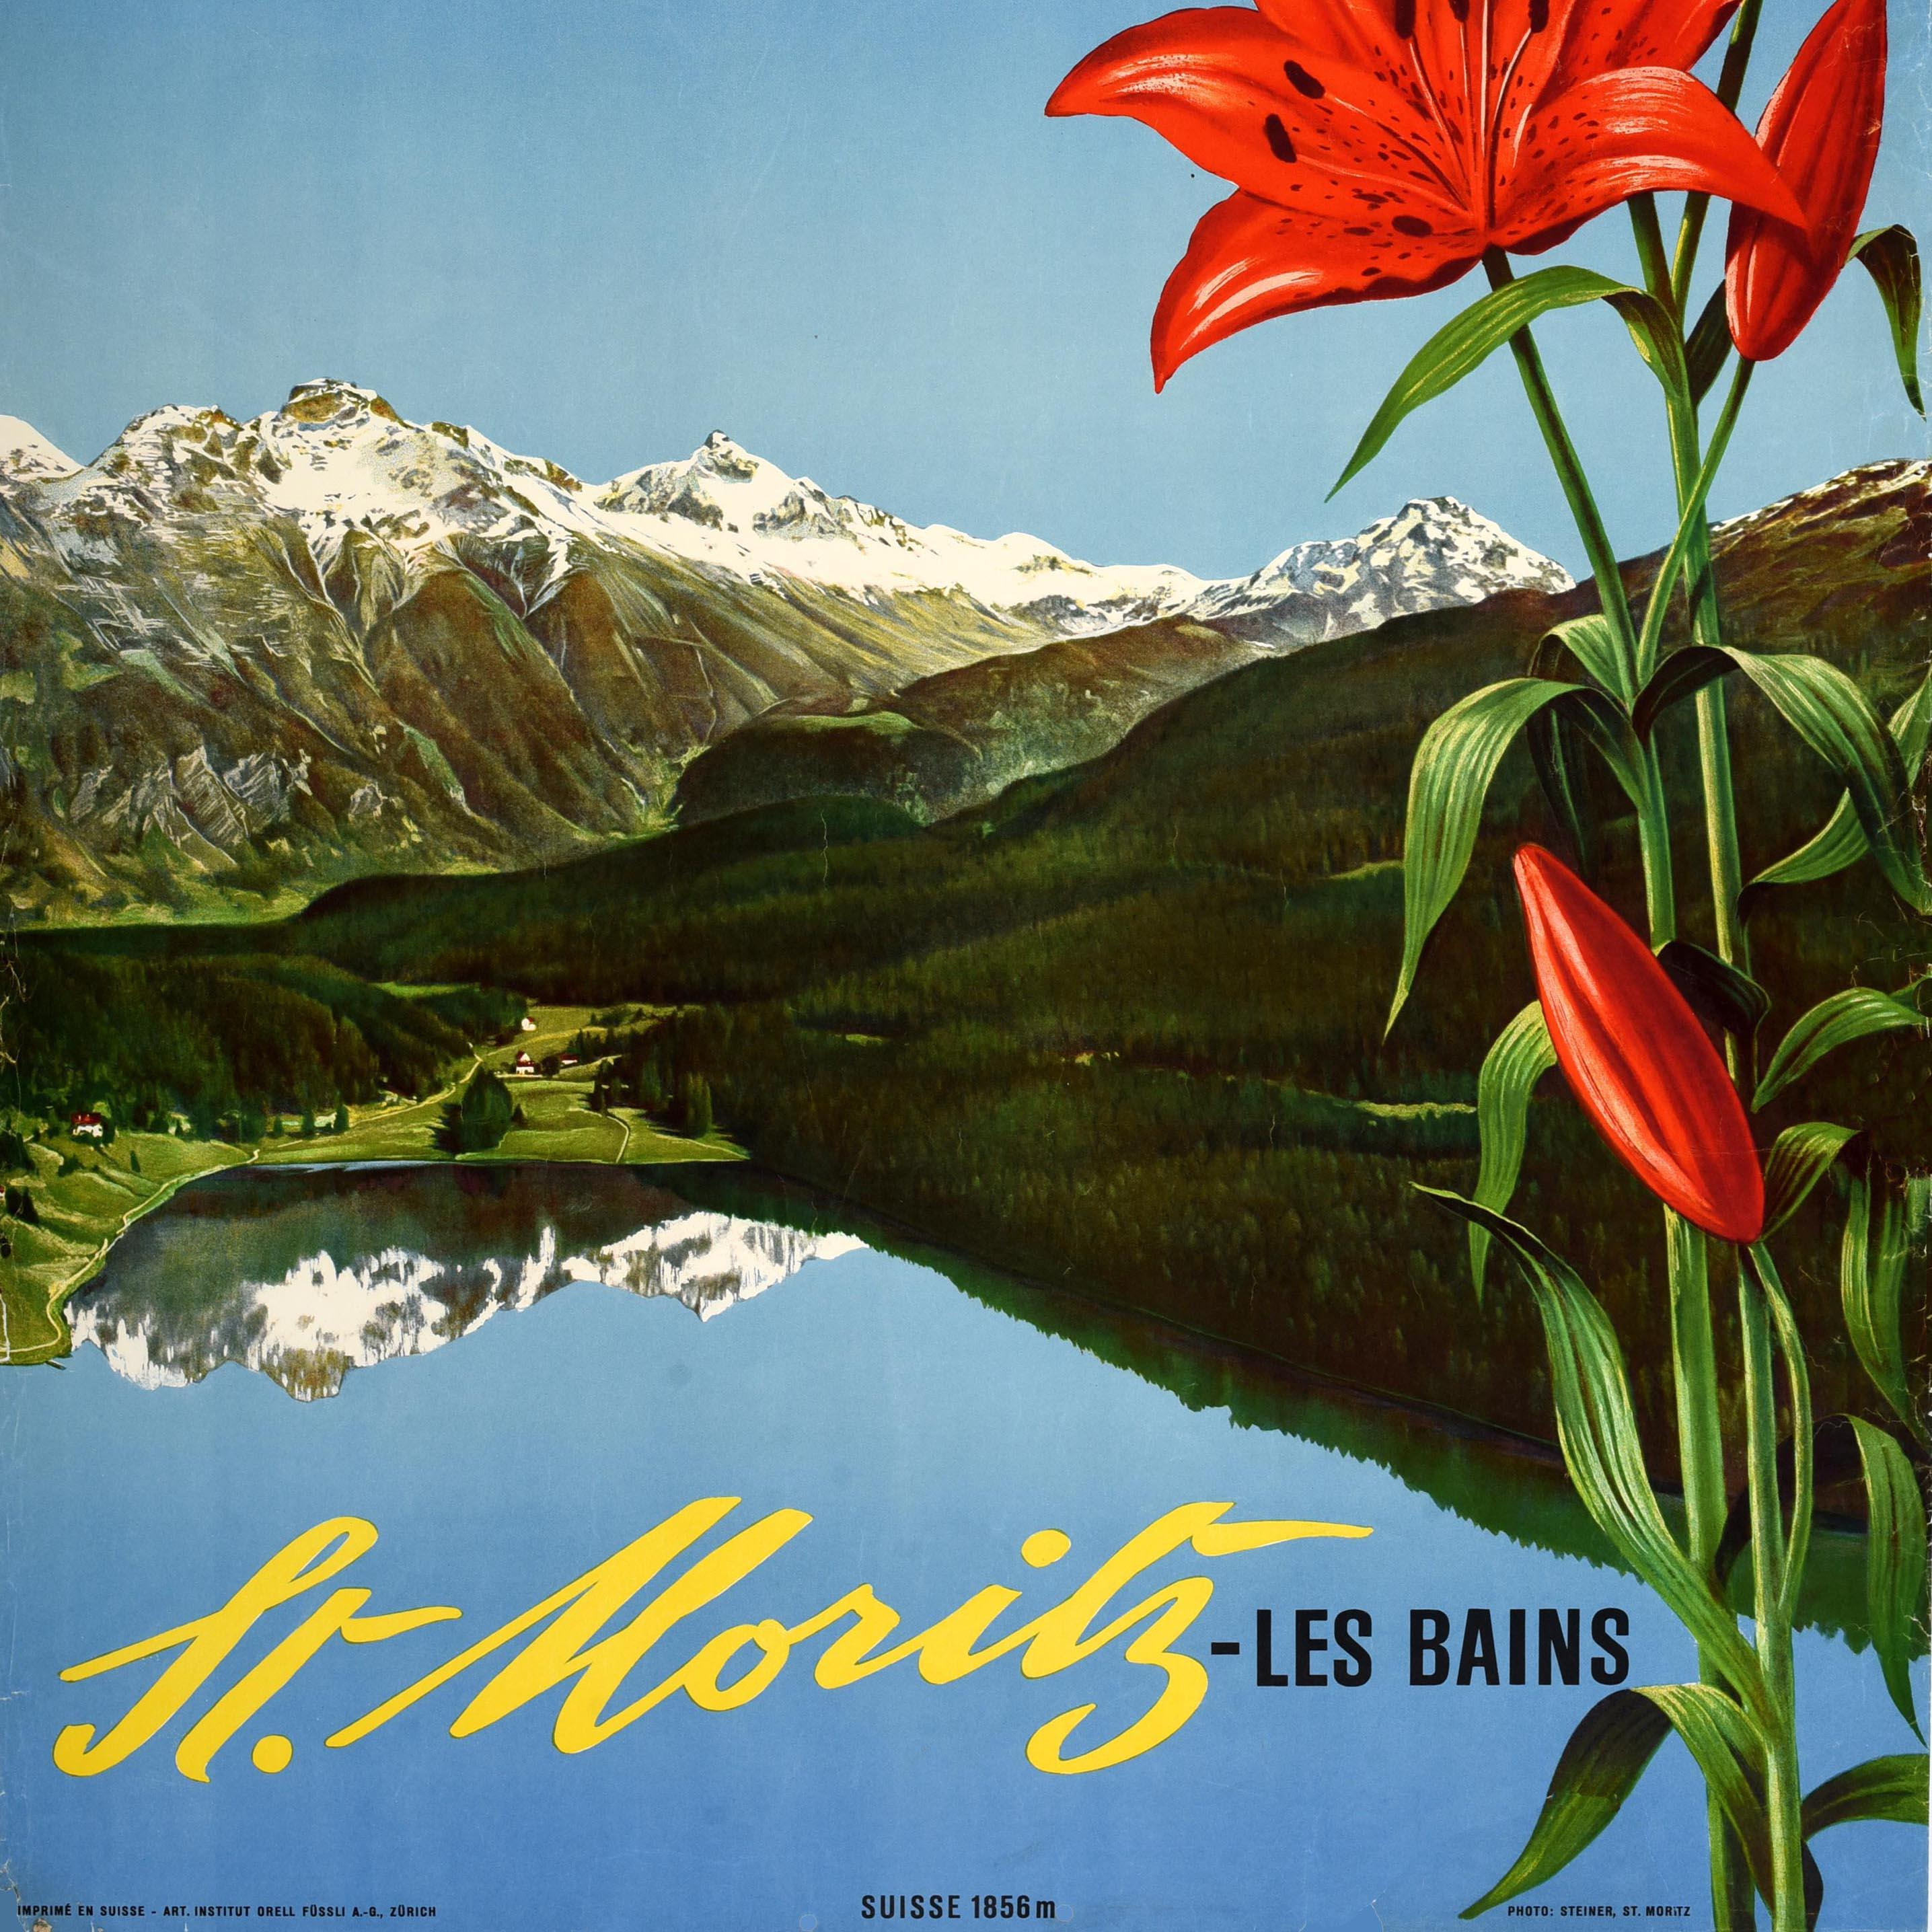 Original vintage Switzerland travel poster for St Moritz Les Bains Suisse 1856m featuring a scenic image by the notable Swiss photographer Albert Steiner (1877-1965) of a lake side village in the countryside nestled by trees on hills below snow